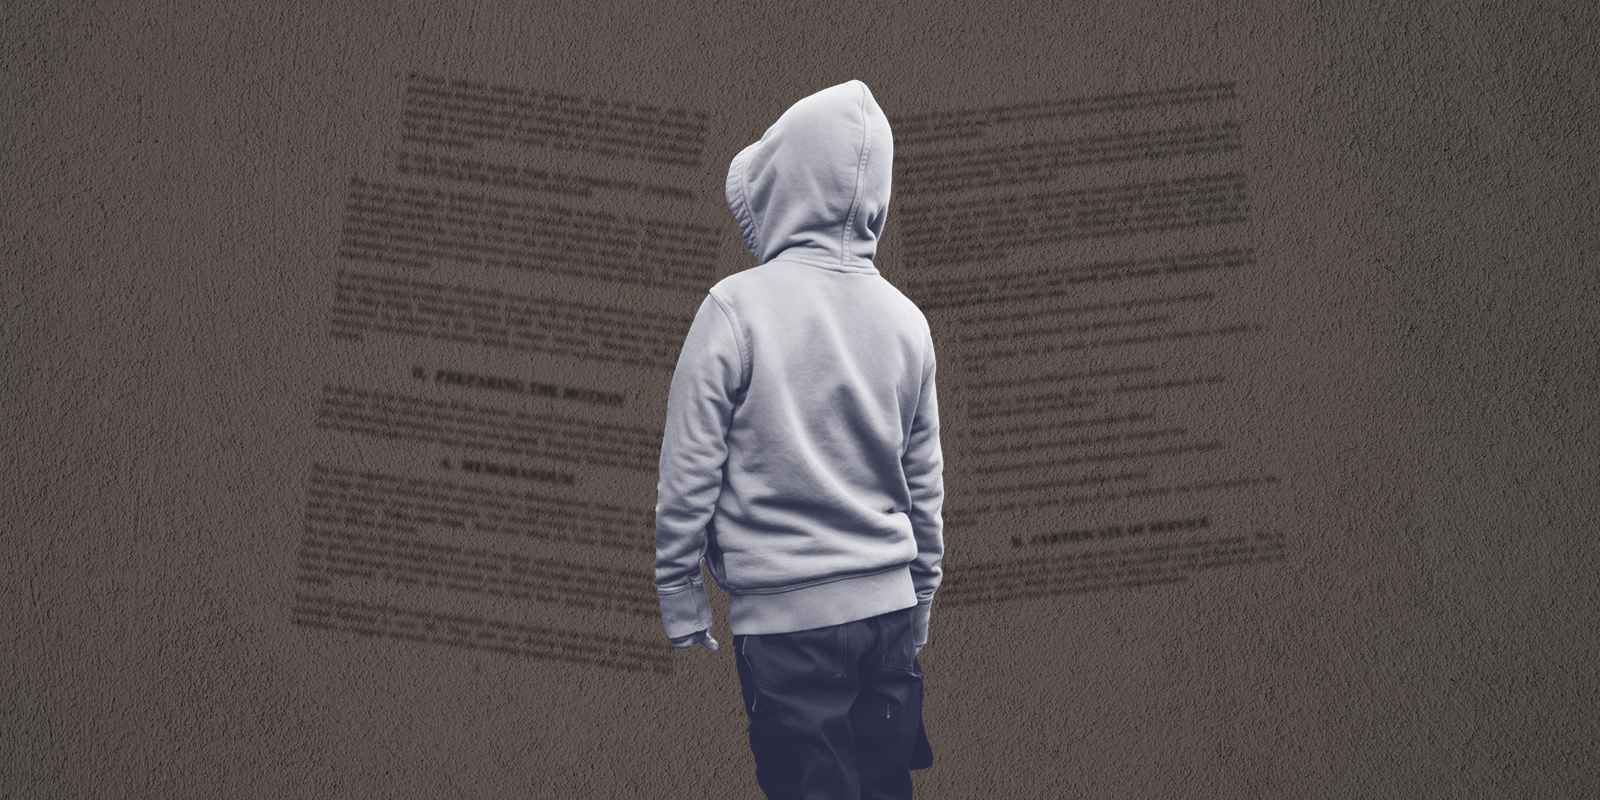 A child, standing in a hooded sweatshirt, facing away, on a textured grey background